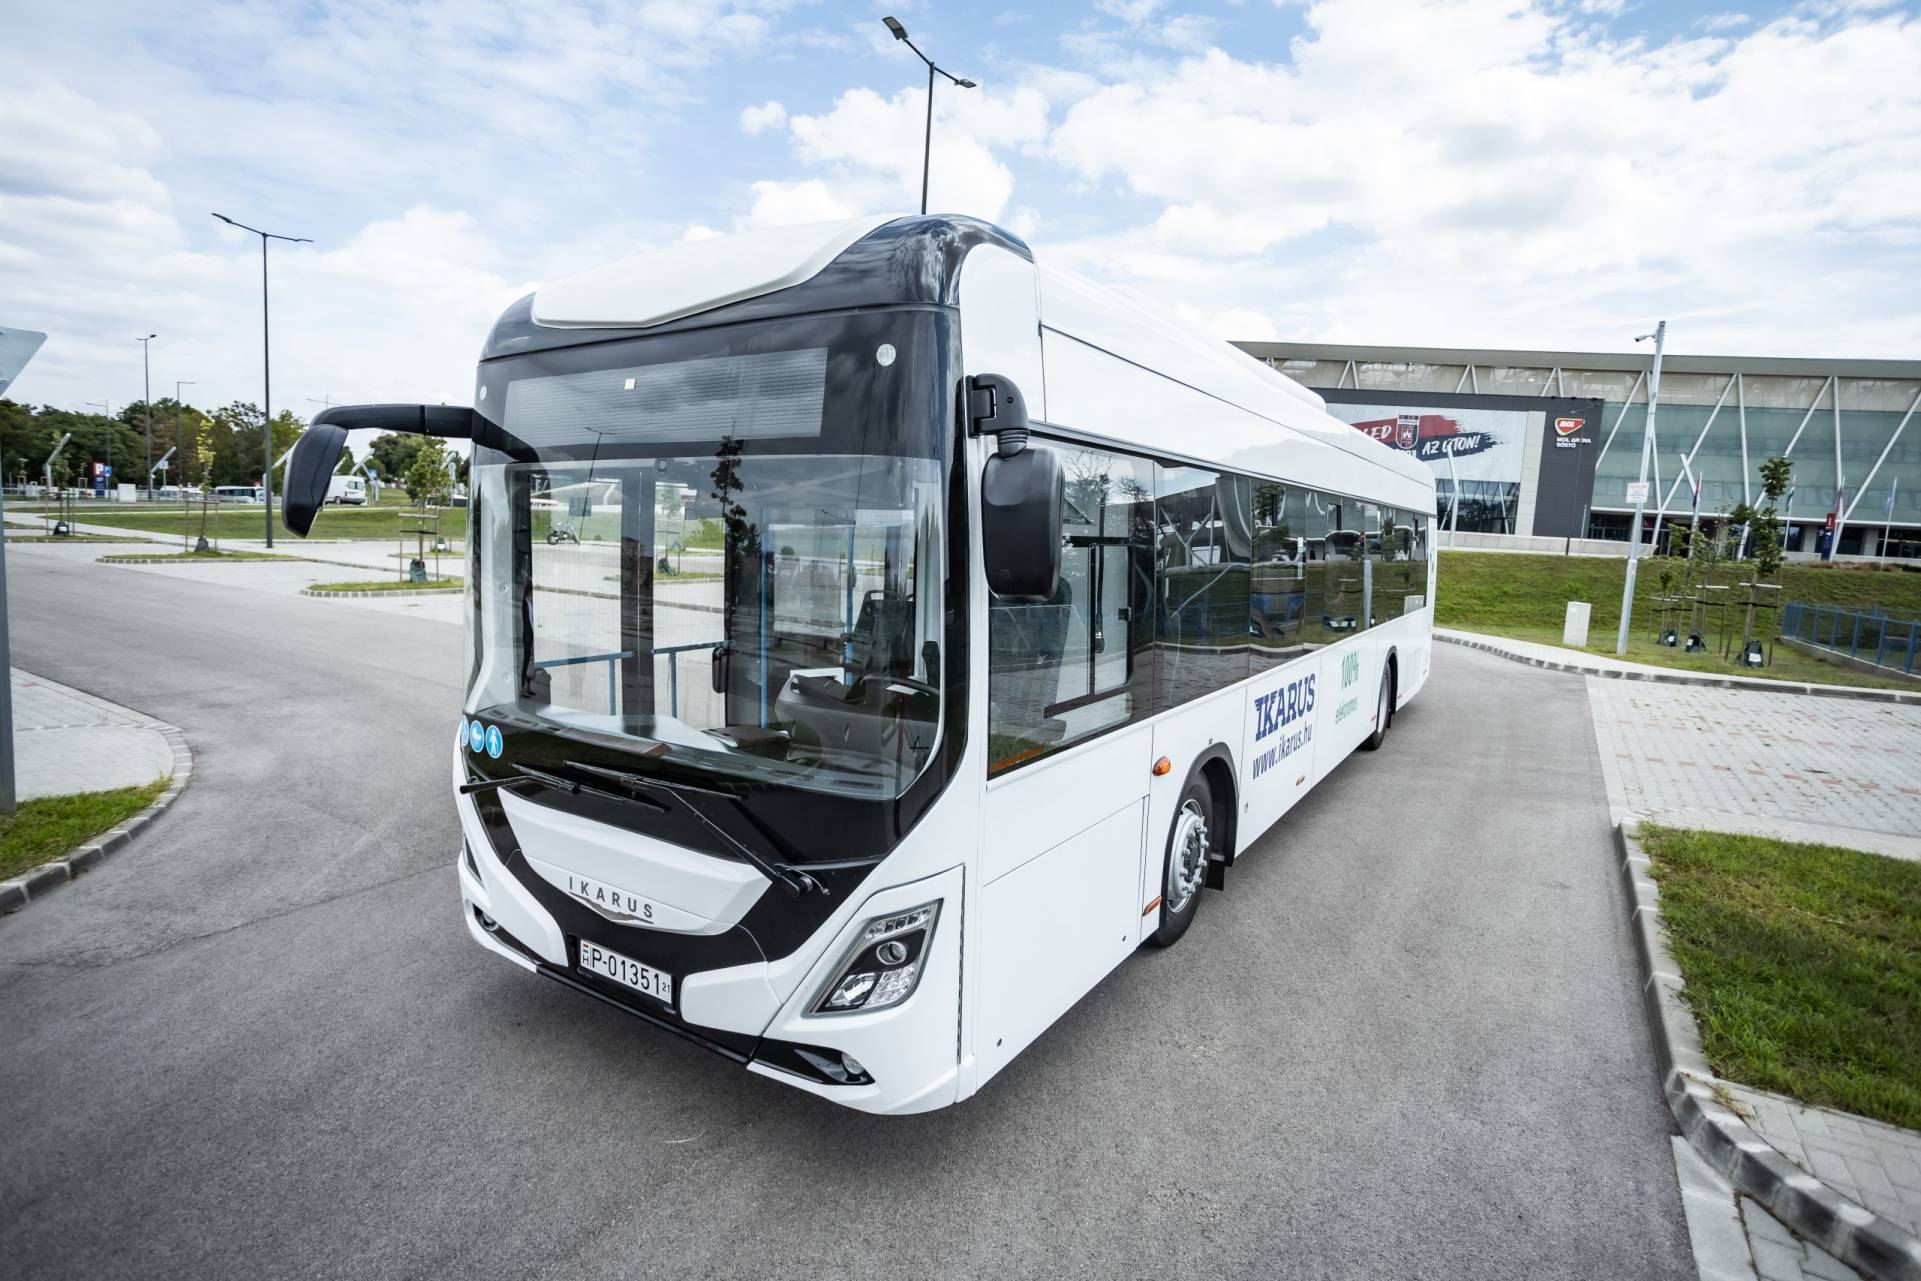 Ikarus delivered a couple of 120e electric buses in Hungary (jointly  developed with CRRC) - Sustainable Bus